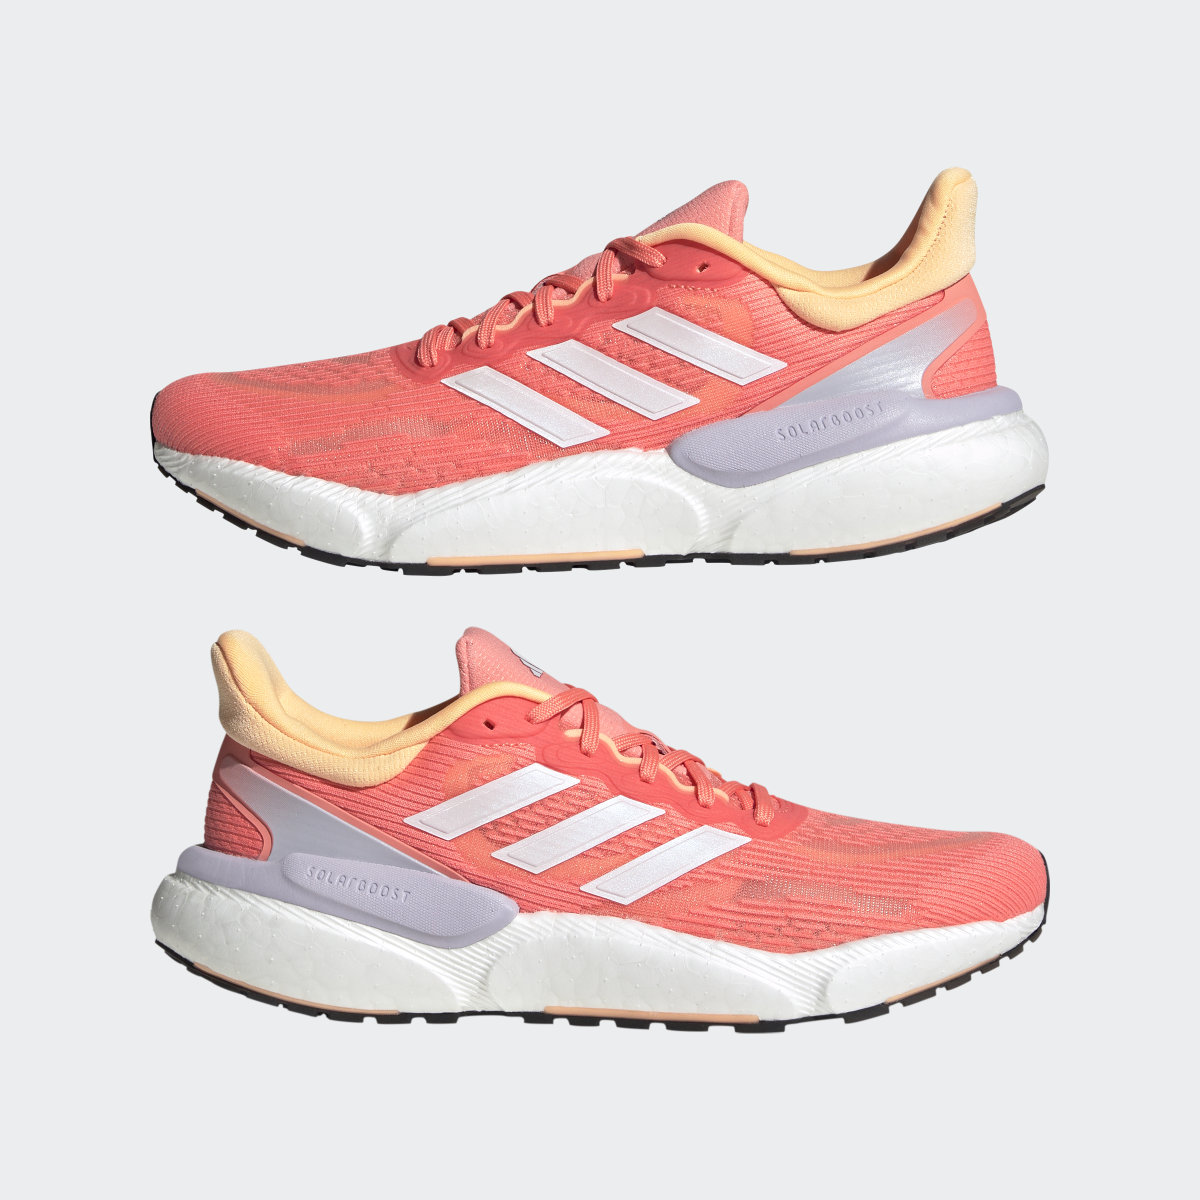 Adidas Solarboost 5 Shoes. 8